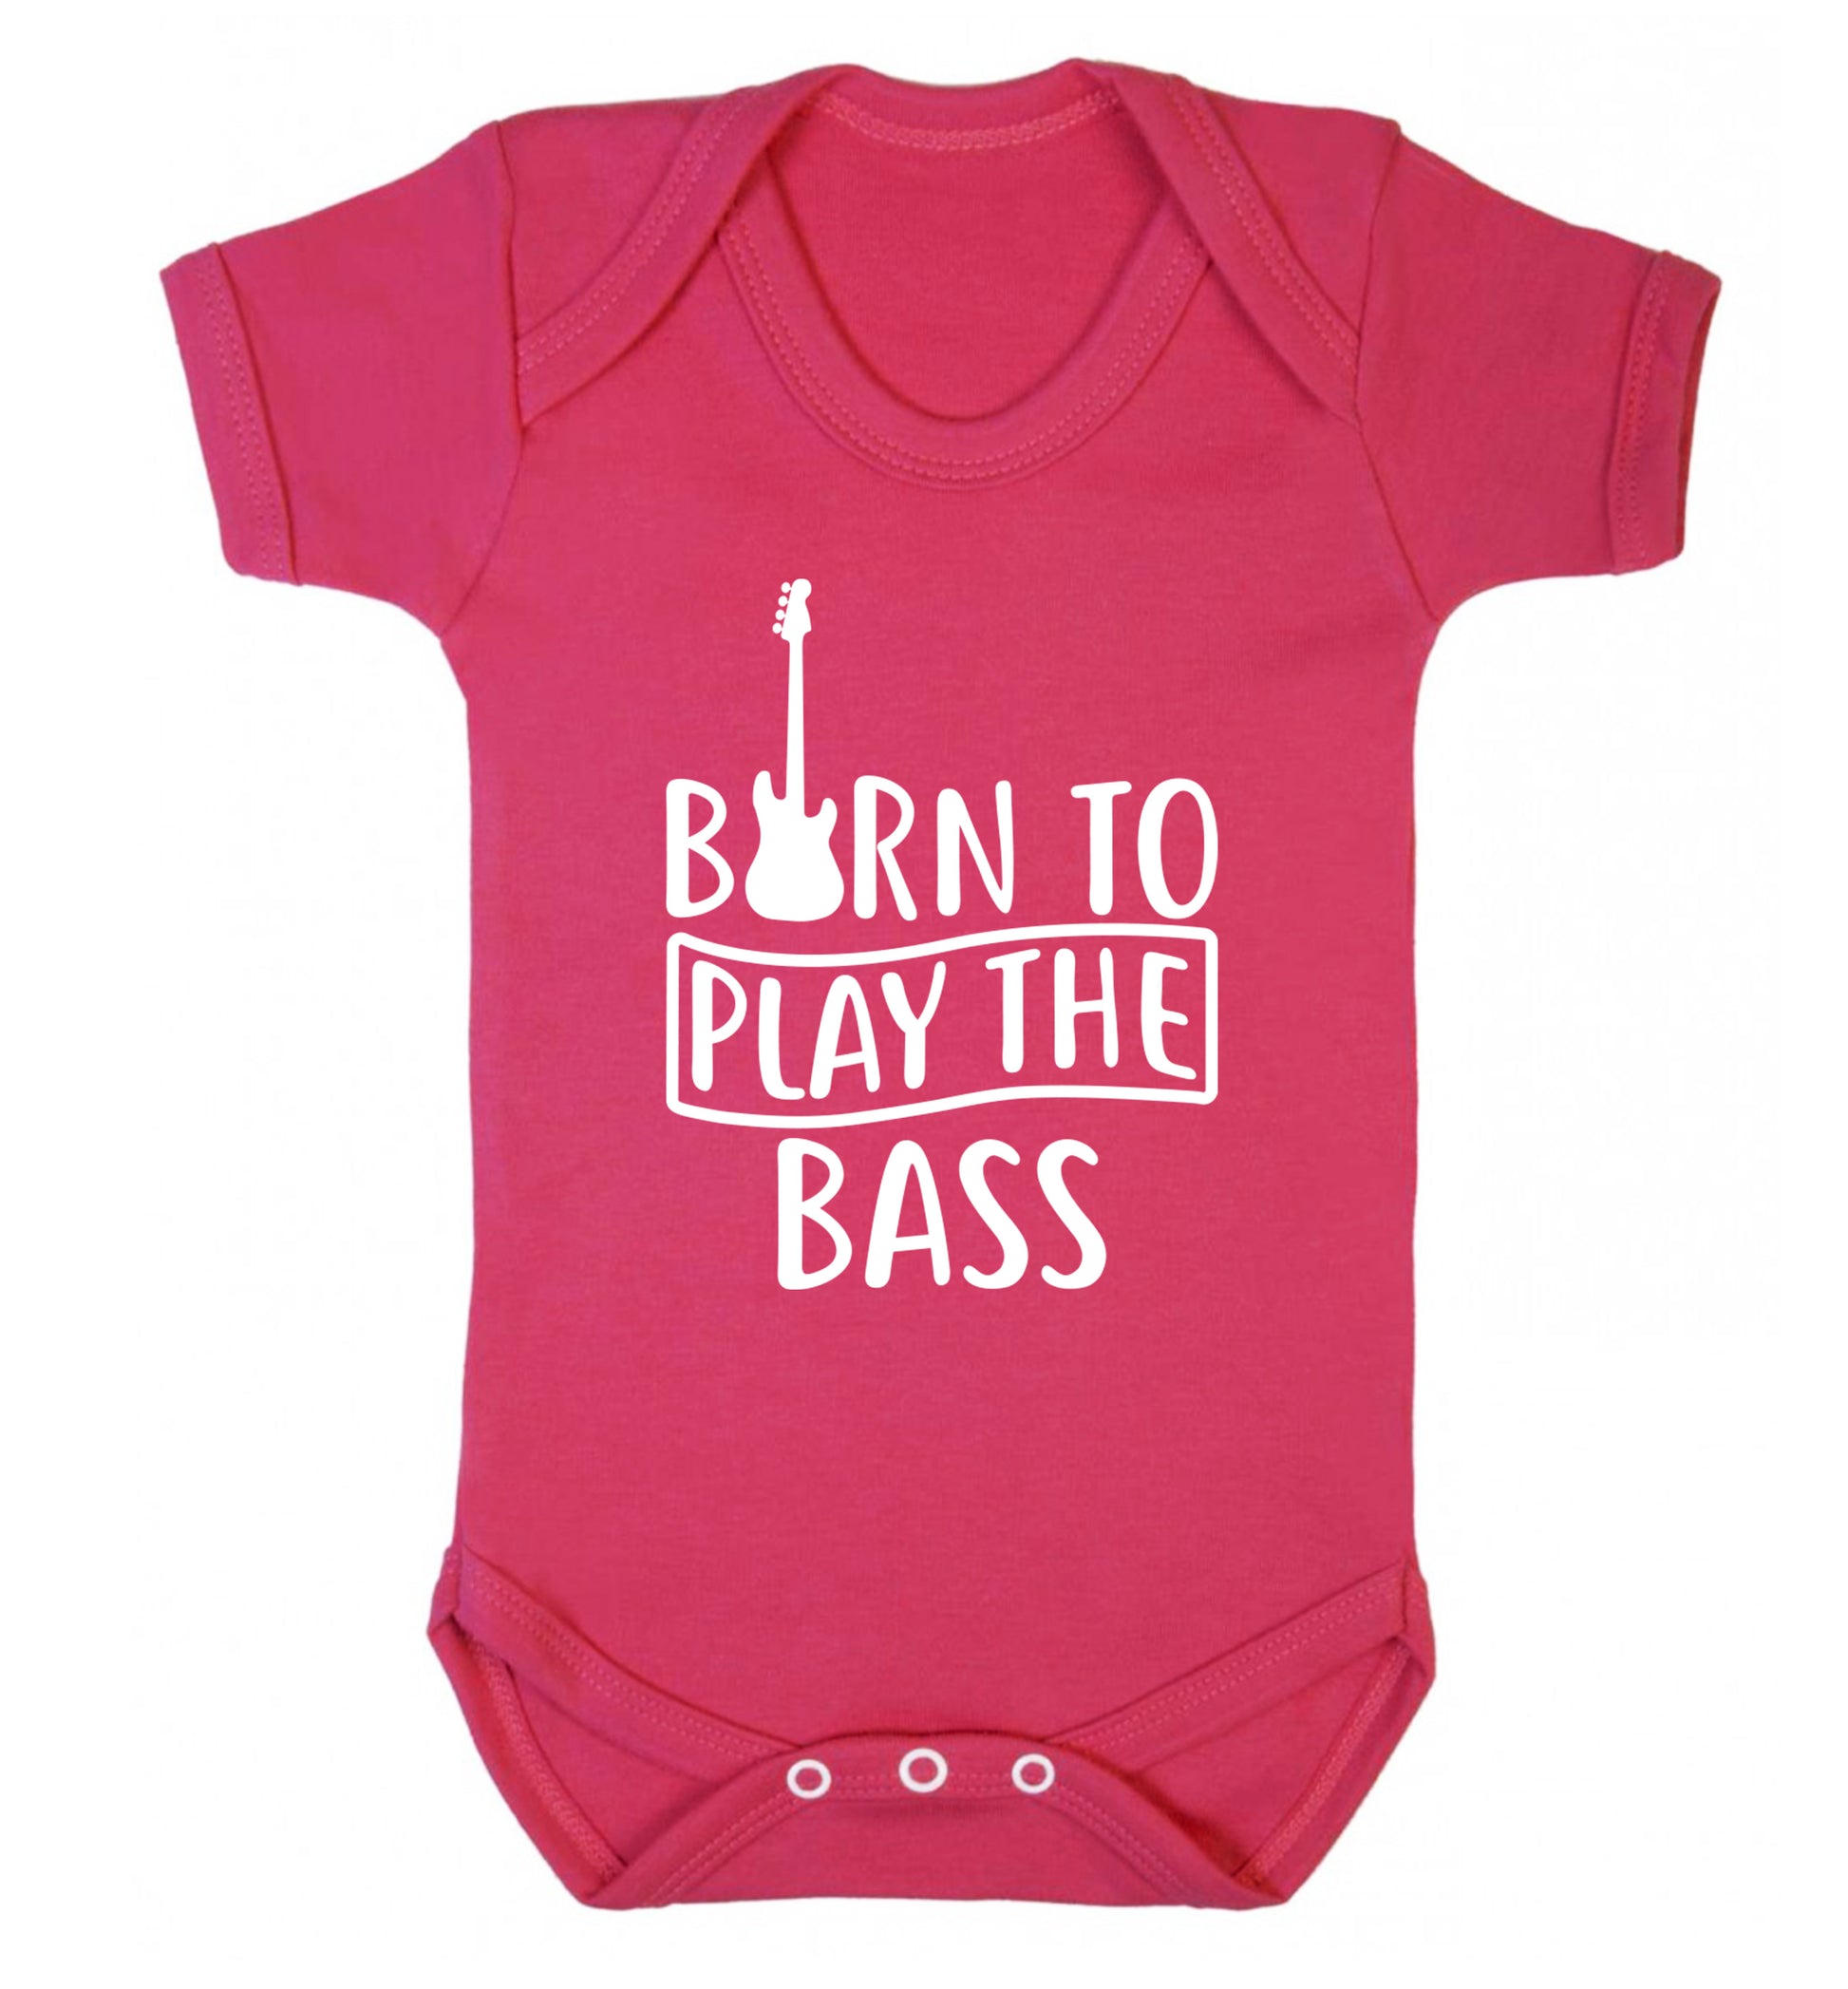 Born to play the bass Baby Vest dark pink 18-24 months